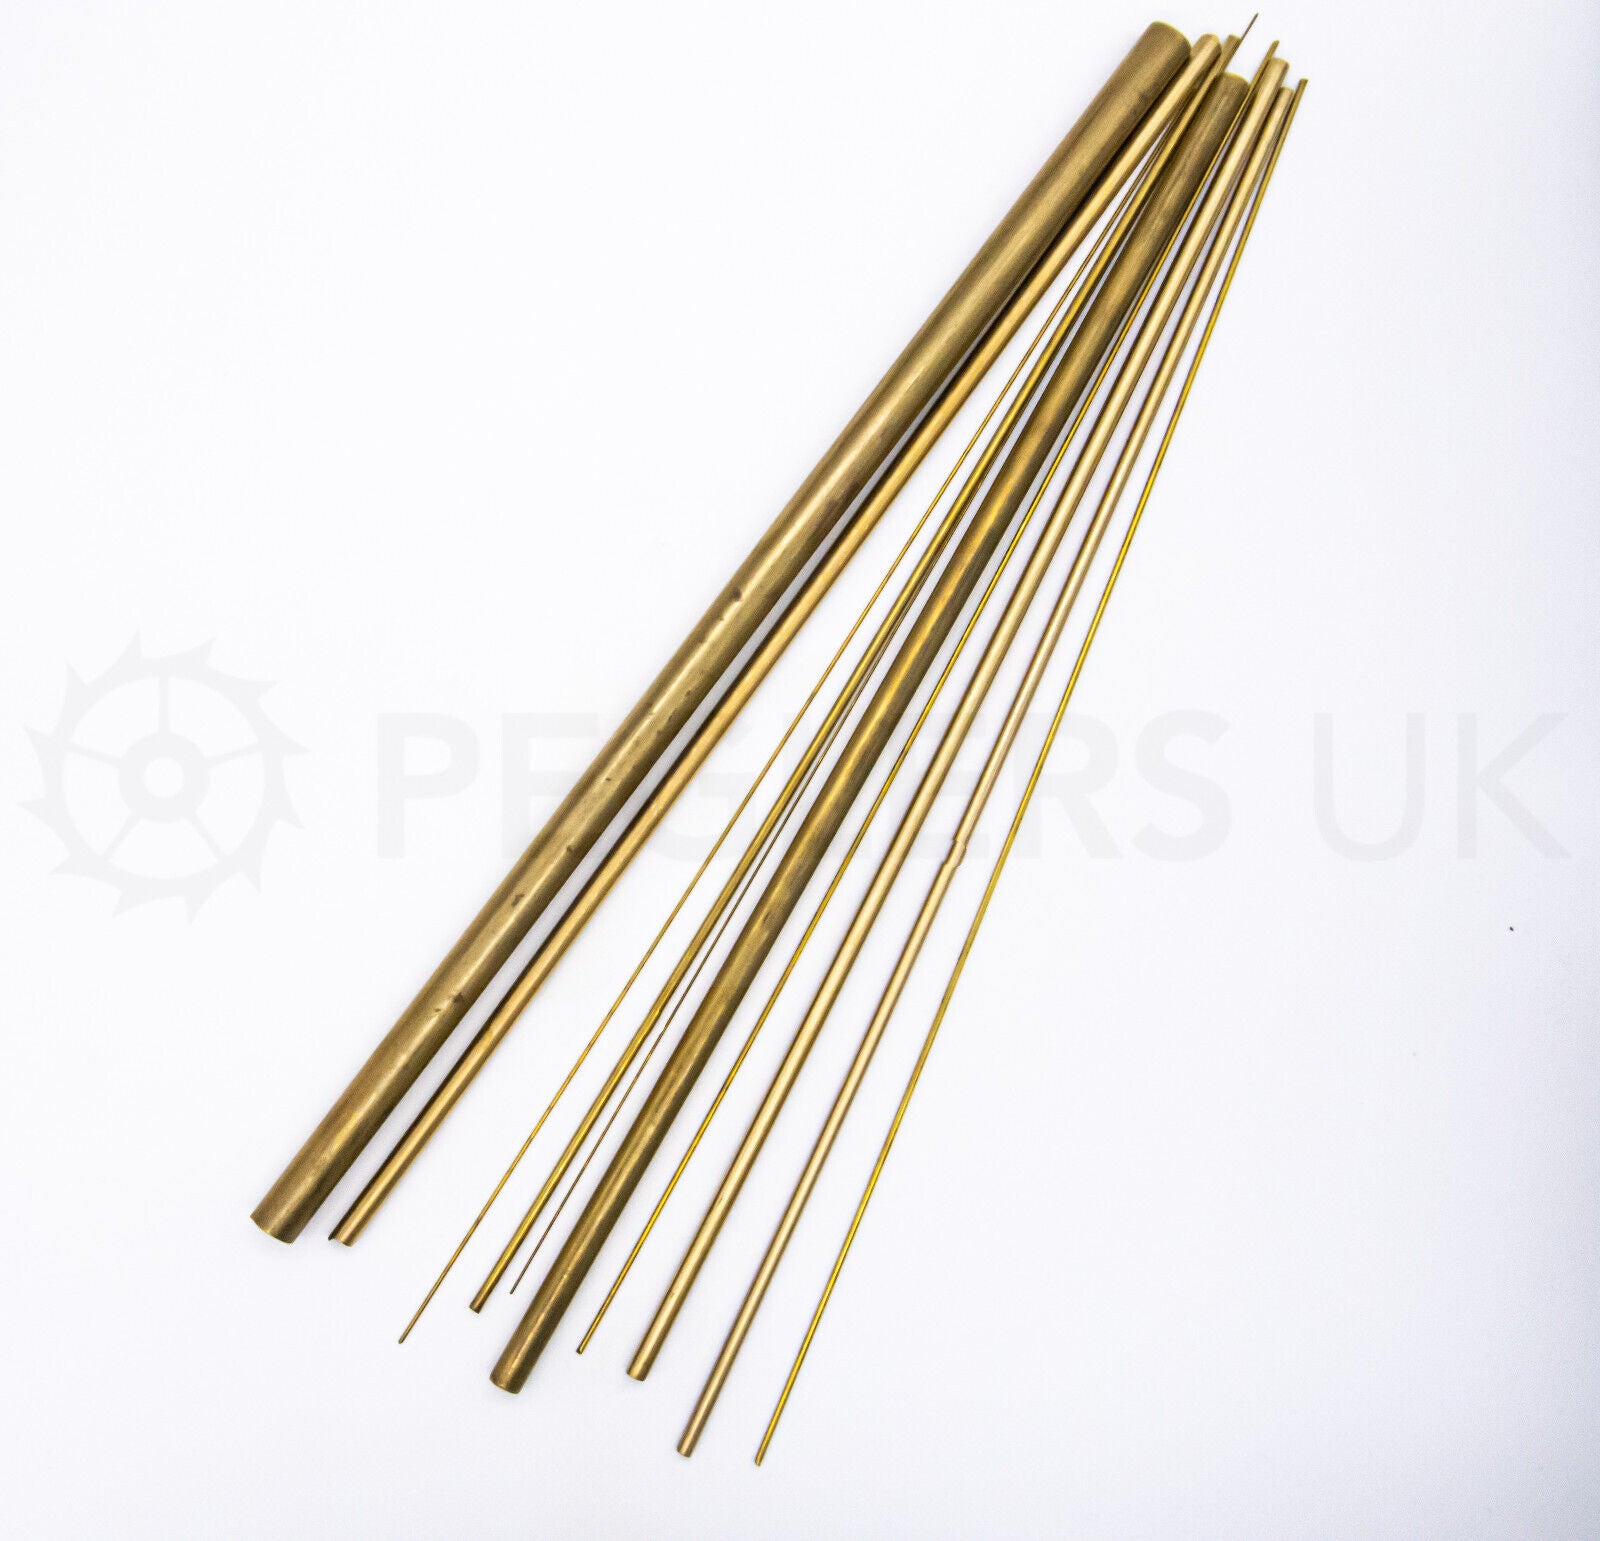 10x Assorted Solid Brass Bushing Rods - Non-drilled